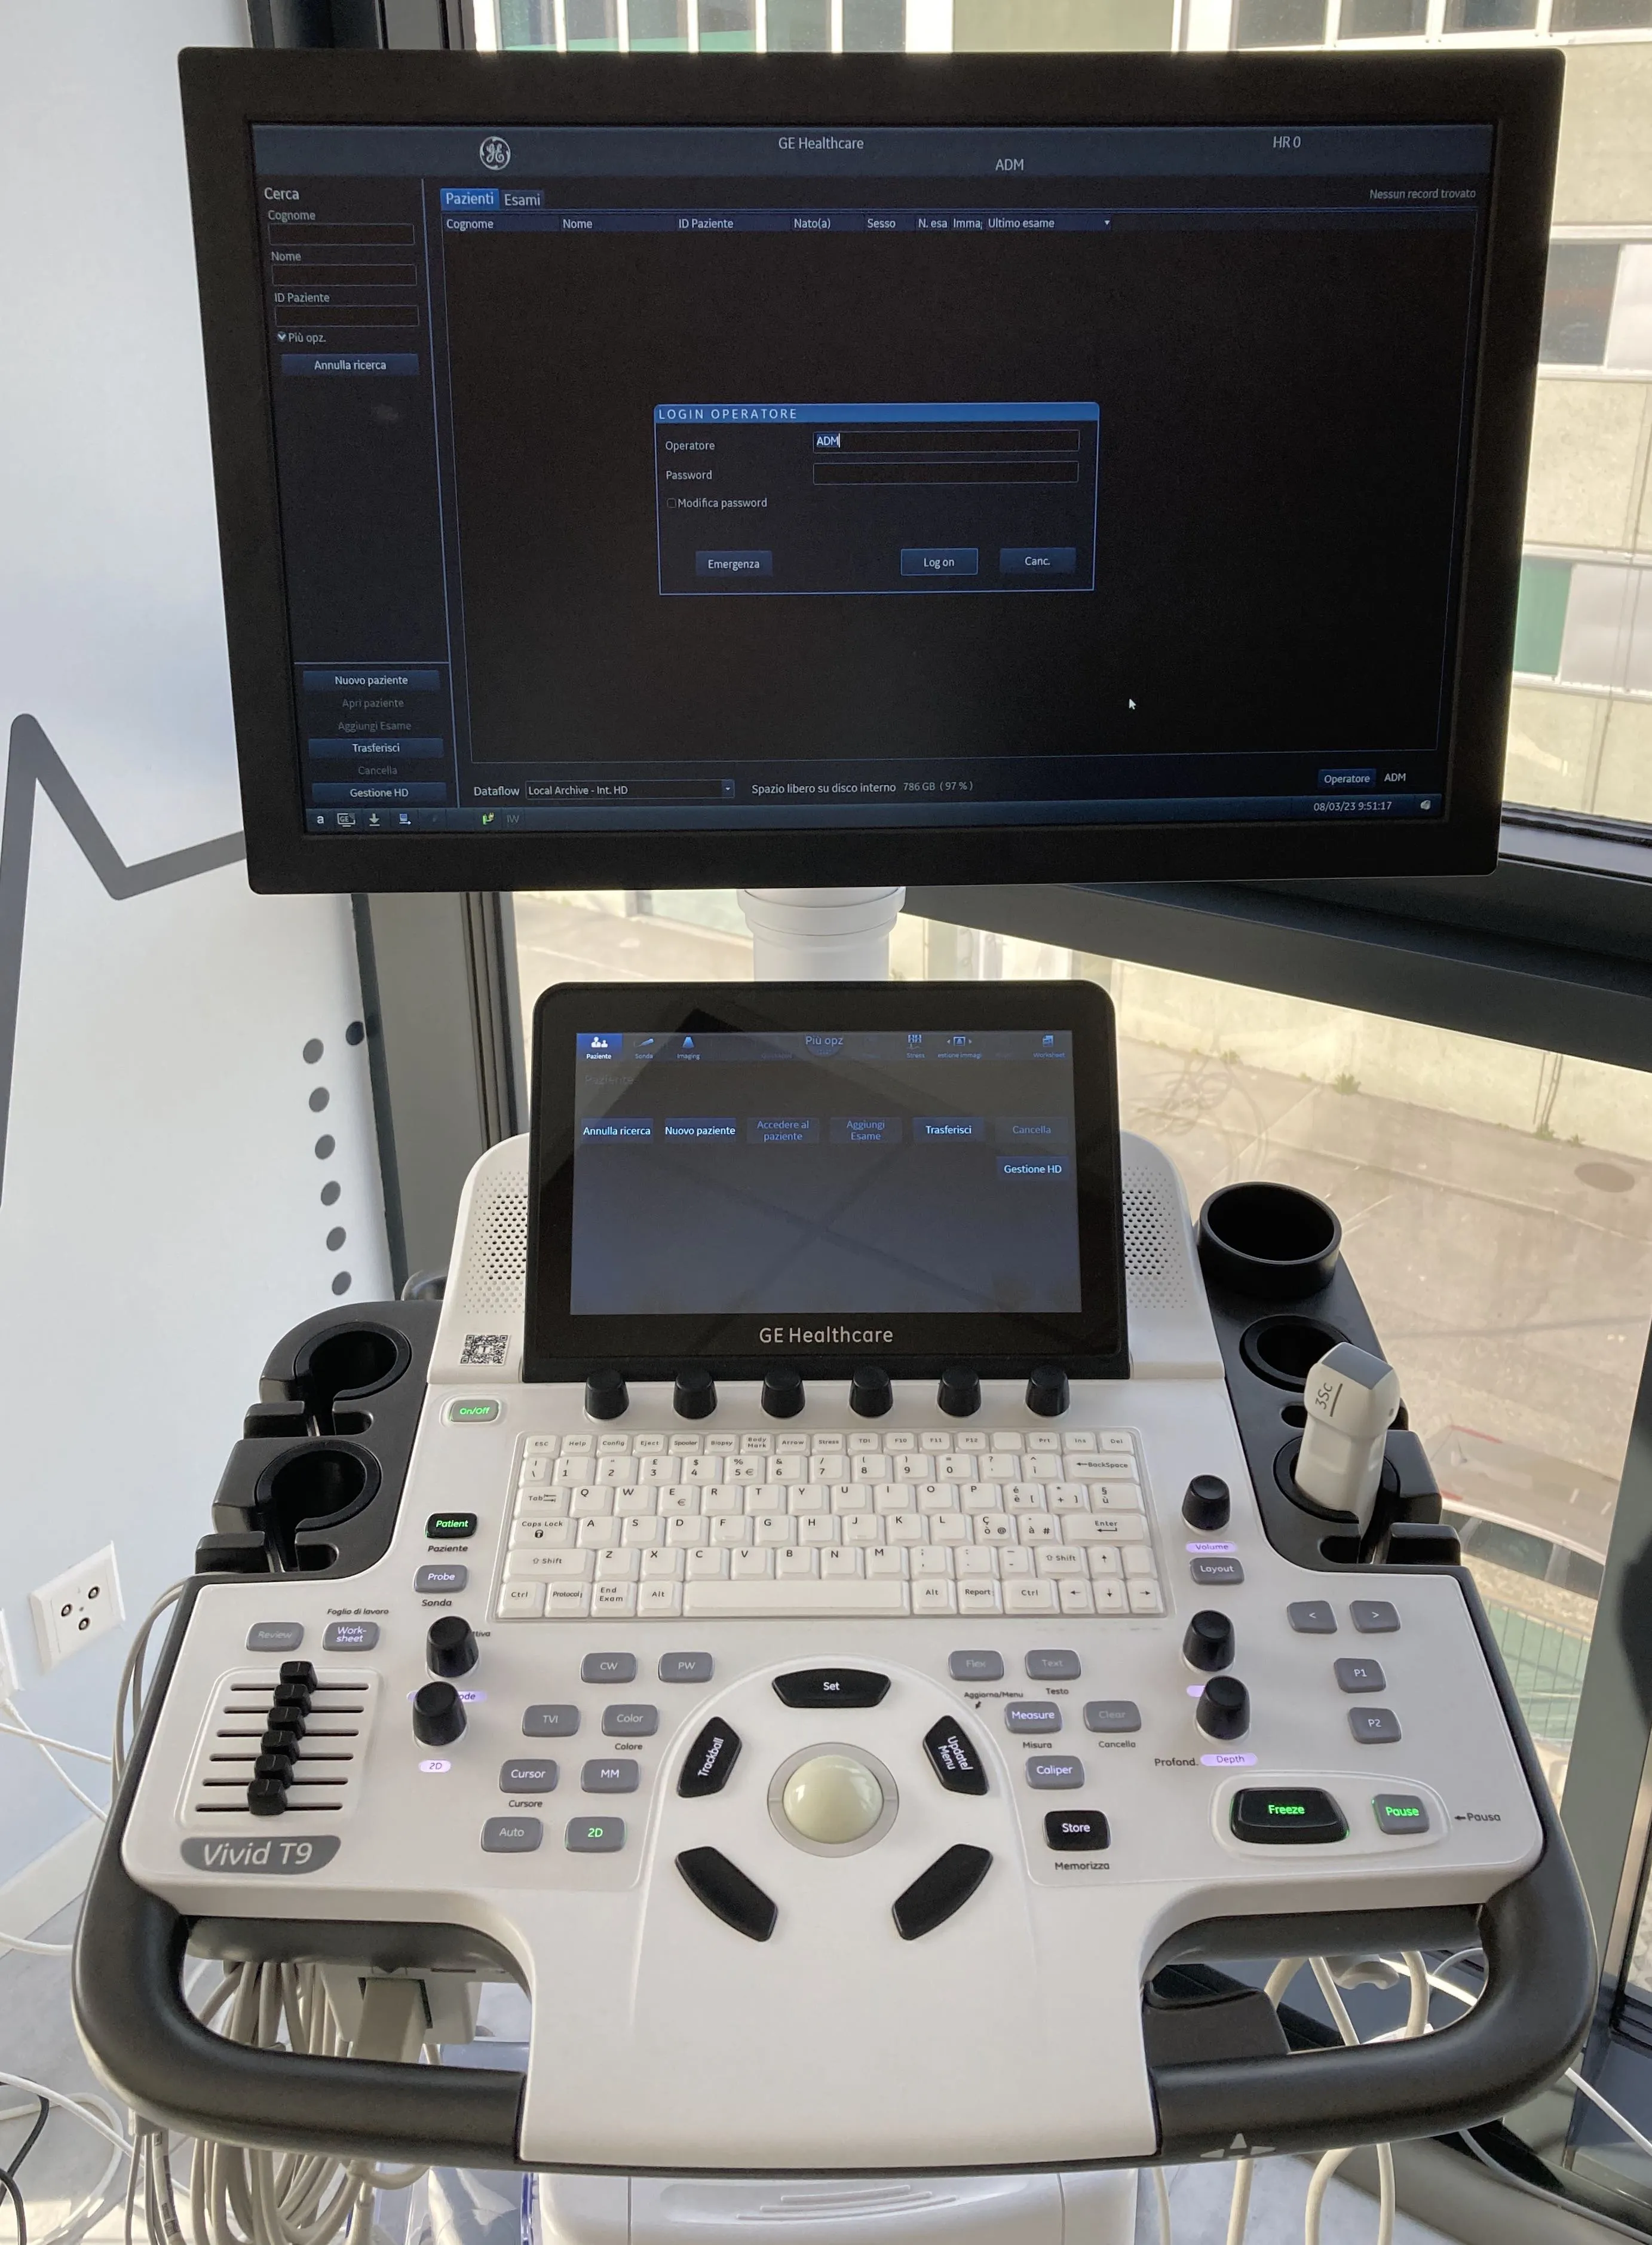 Researchers Uncover Critical Vulnerabilities in GE HealthCare Ultrasound Systems and EchoPAC Software